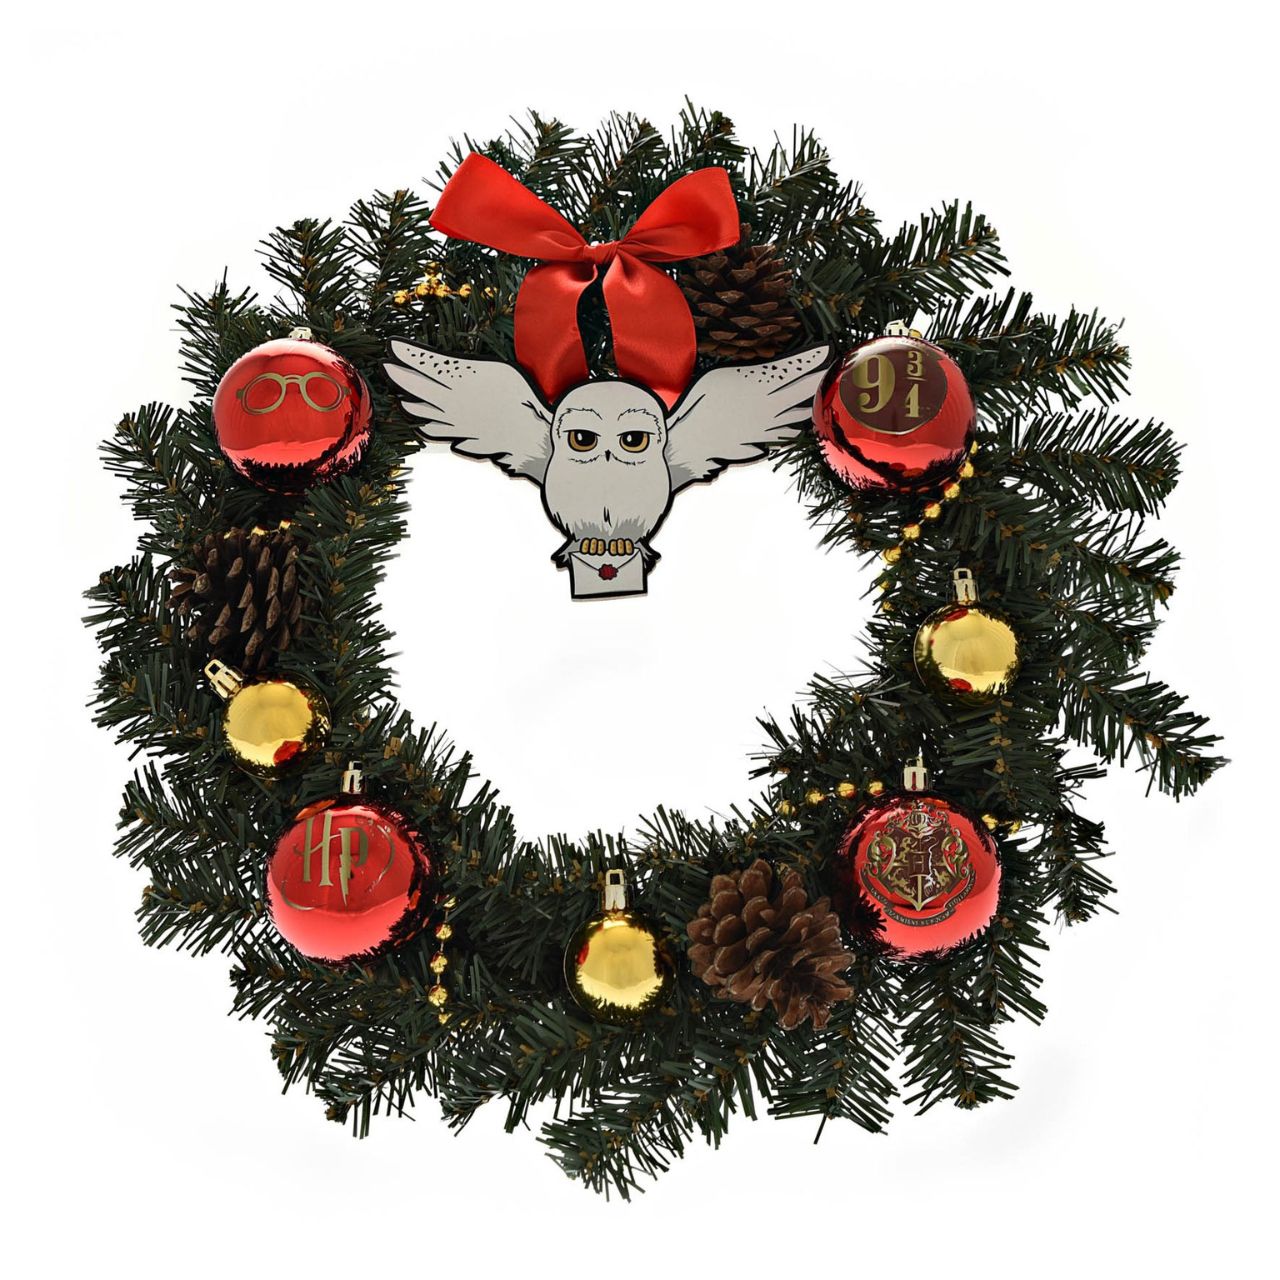 Harry Potter Christmas Wreath with Hedwig 35cm  This Christmas Wreath would be ideal for anyone still waiting patiently for Hedwig to deliver their Hogwarts acceptance letter this festive season.